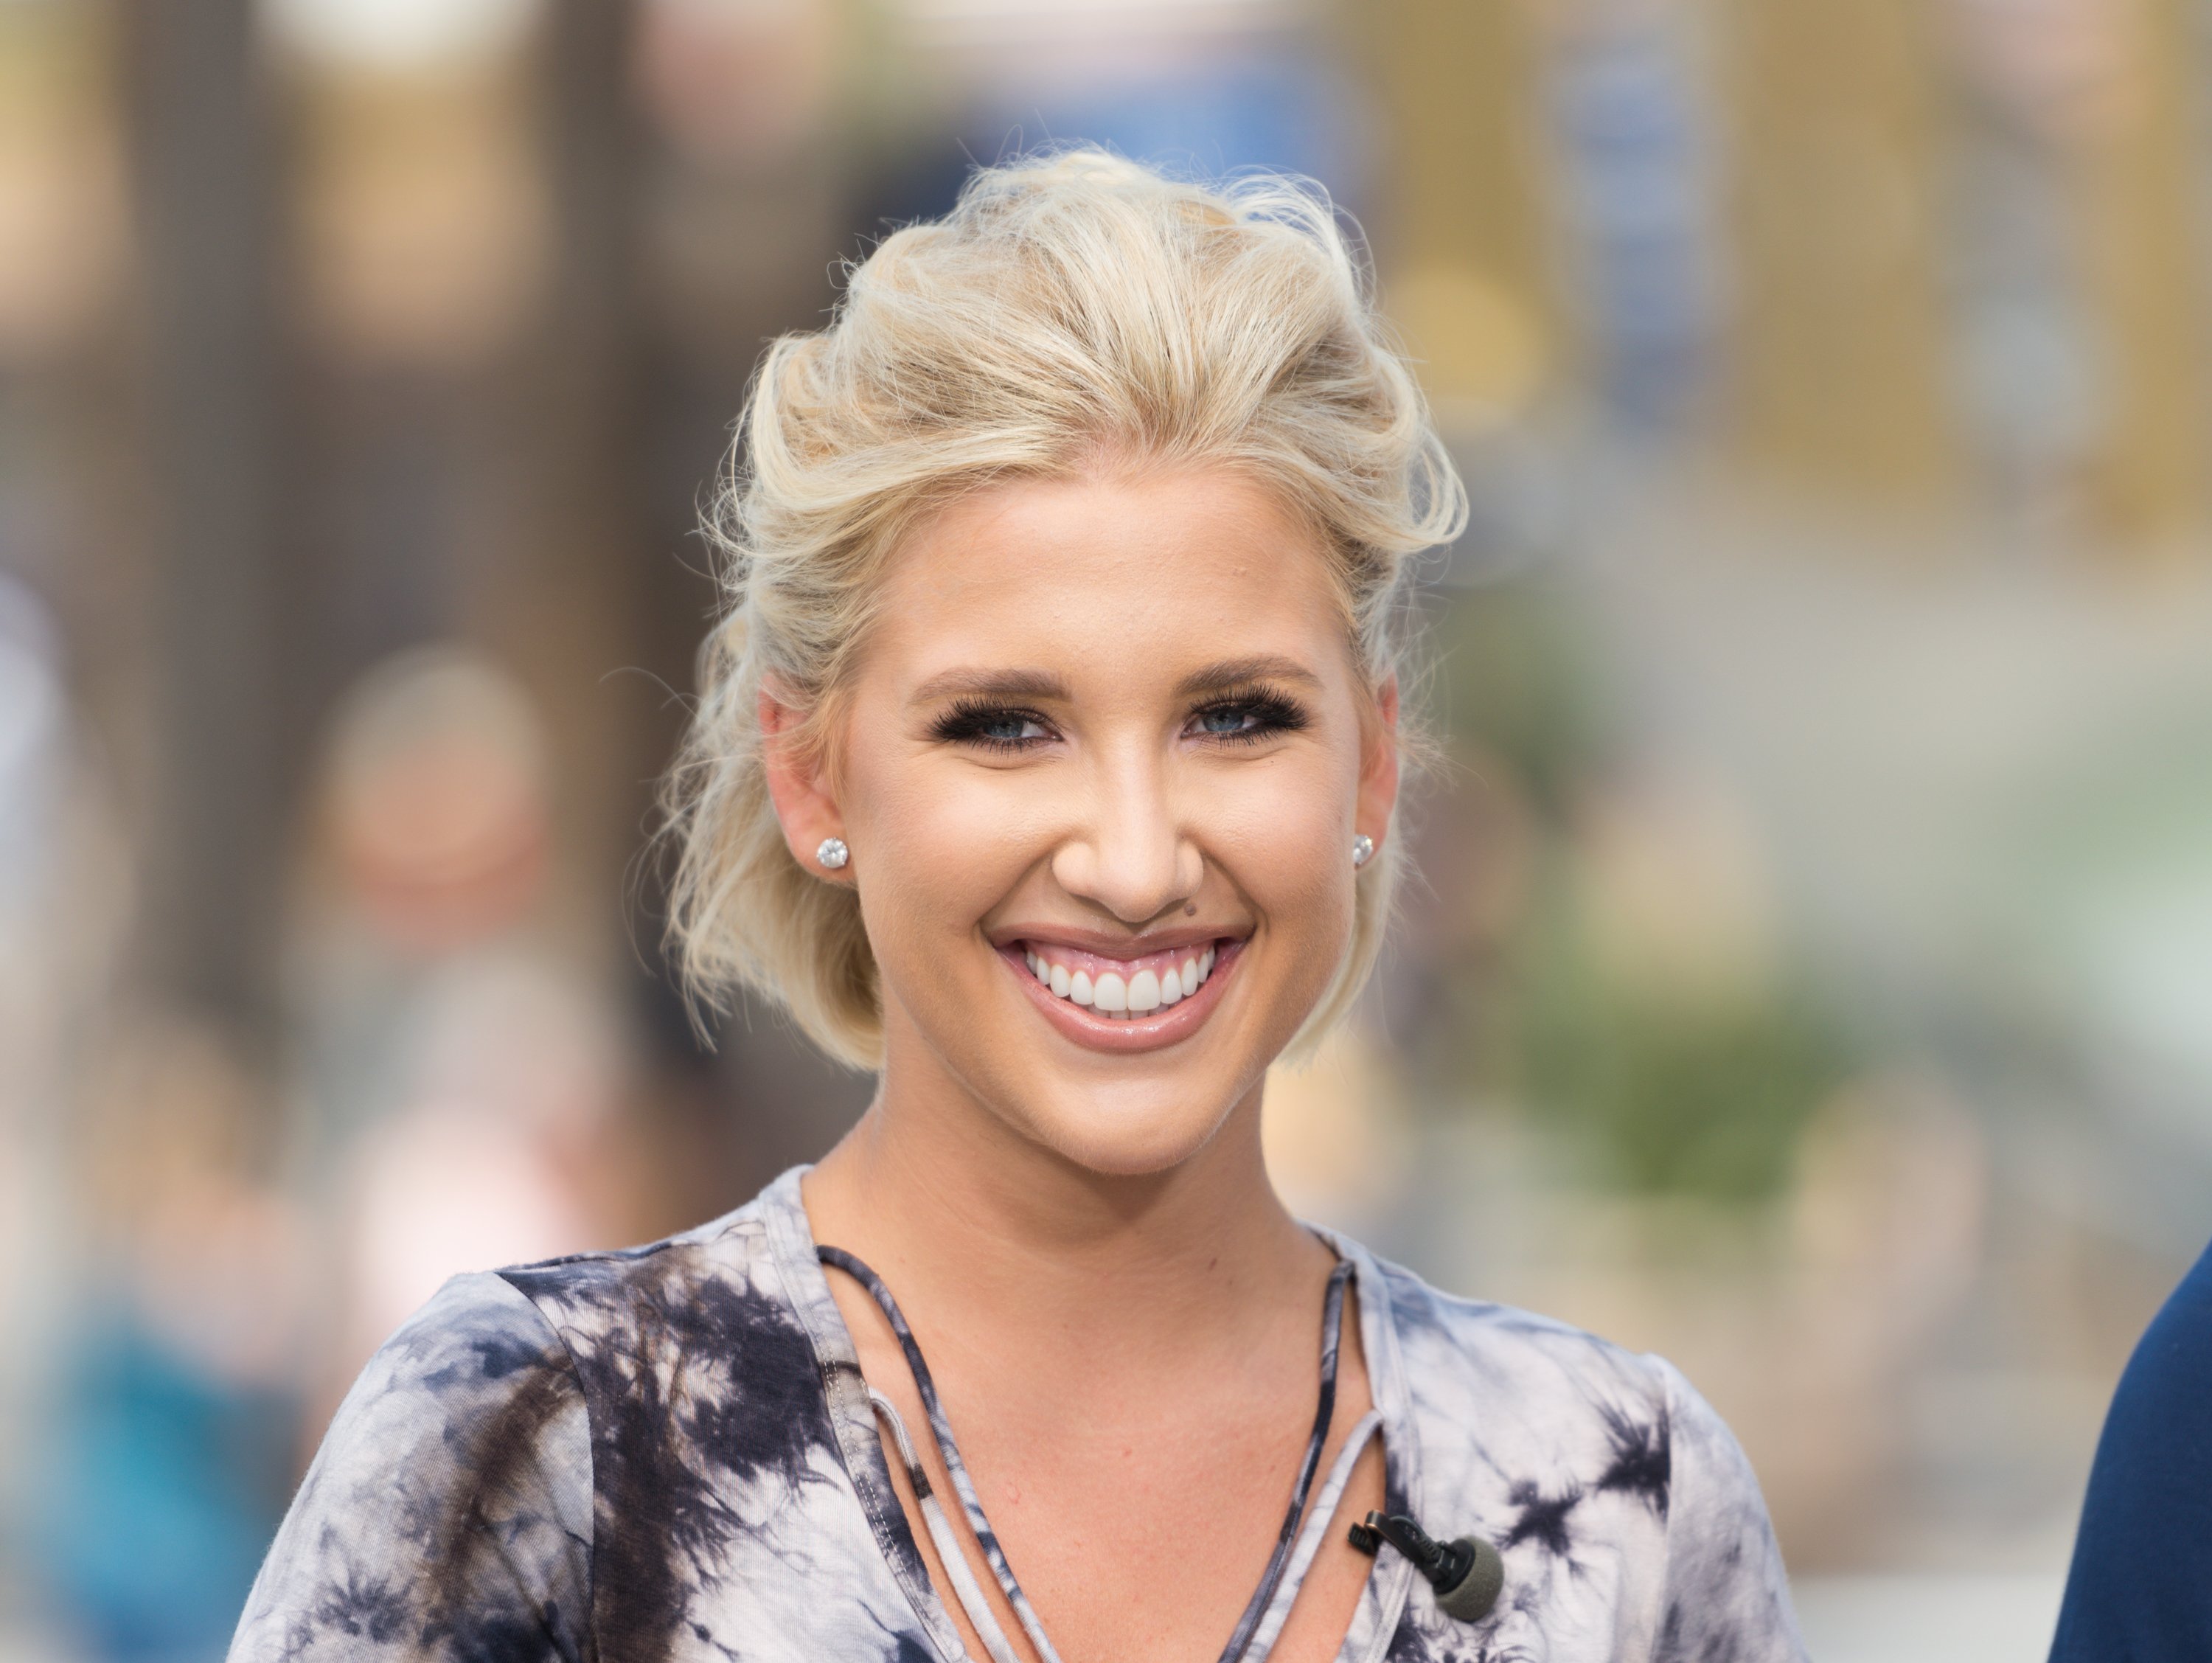 Savannah Chrisley quickly adapted to changes when she first appeared in the 2014 reality show, "Chrisley Knows Best." | Photo: Getty Images